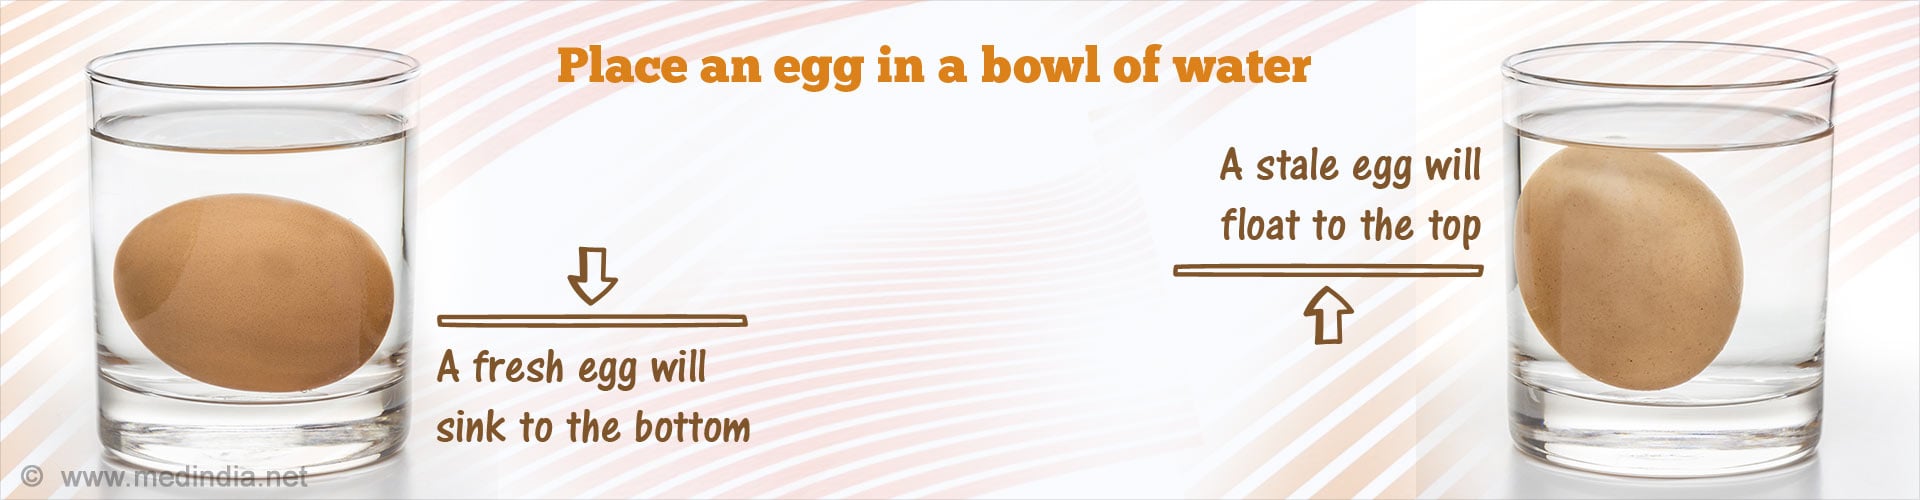 Place an egg in a bowl of water. A stale egg will float to the top. A fresh egg will sink to the bottom.
